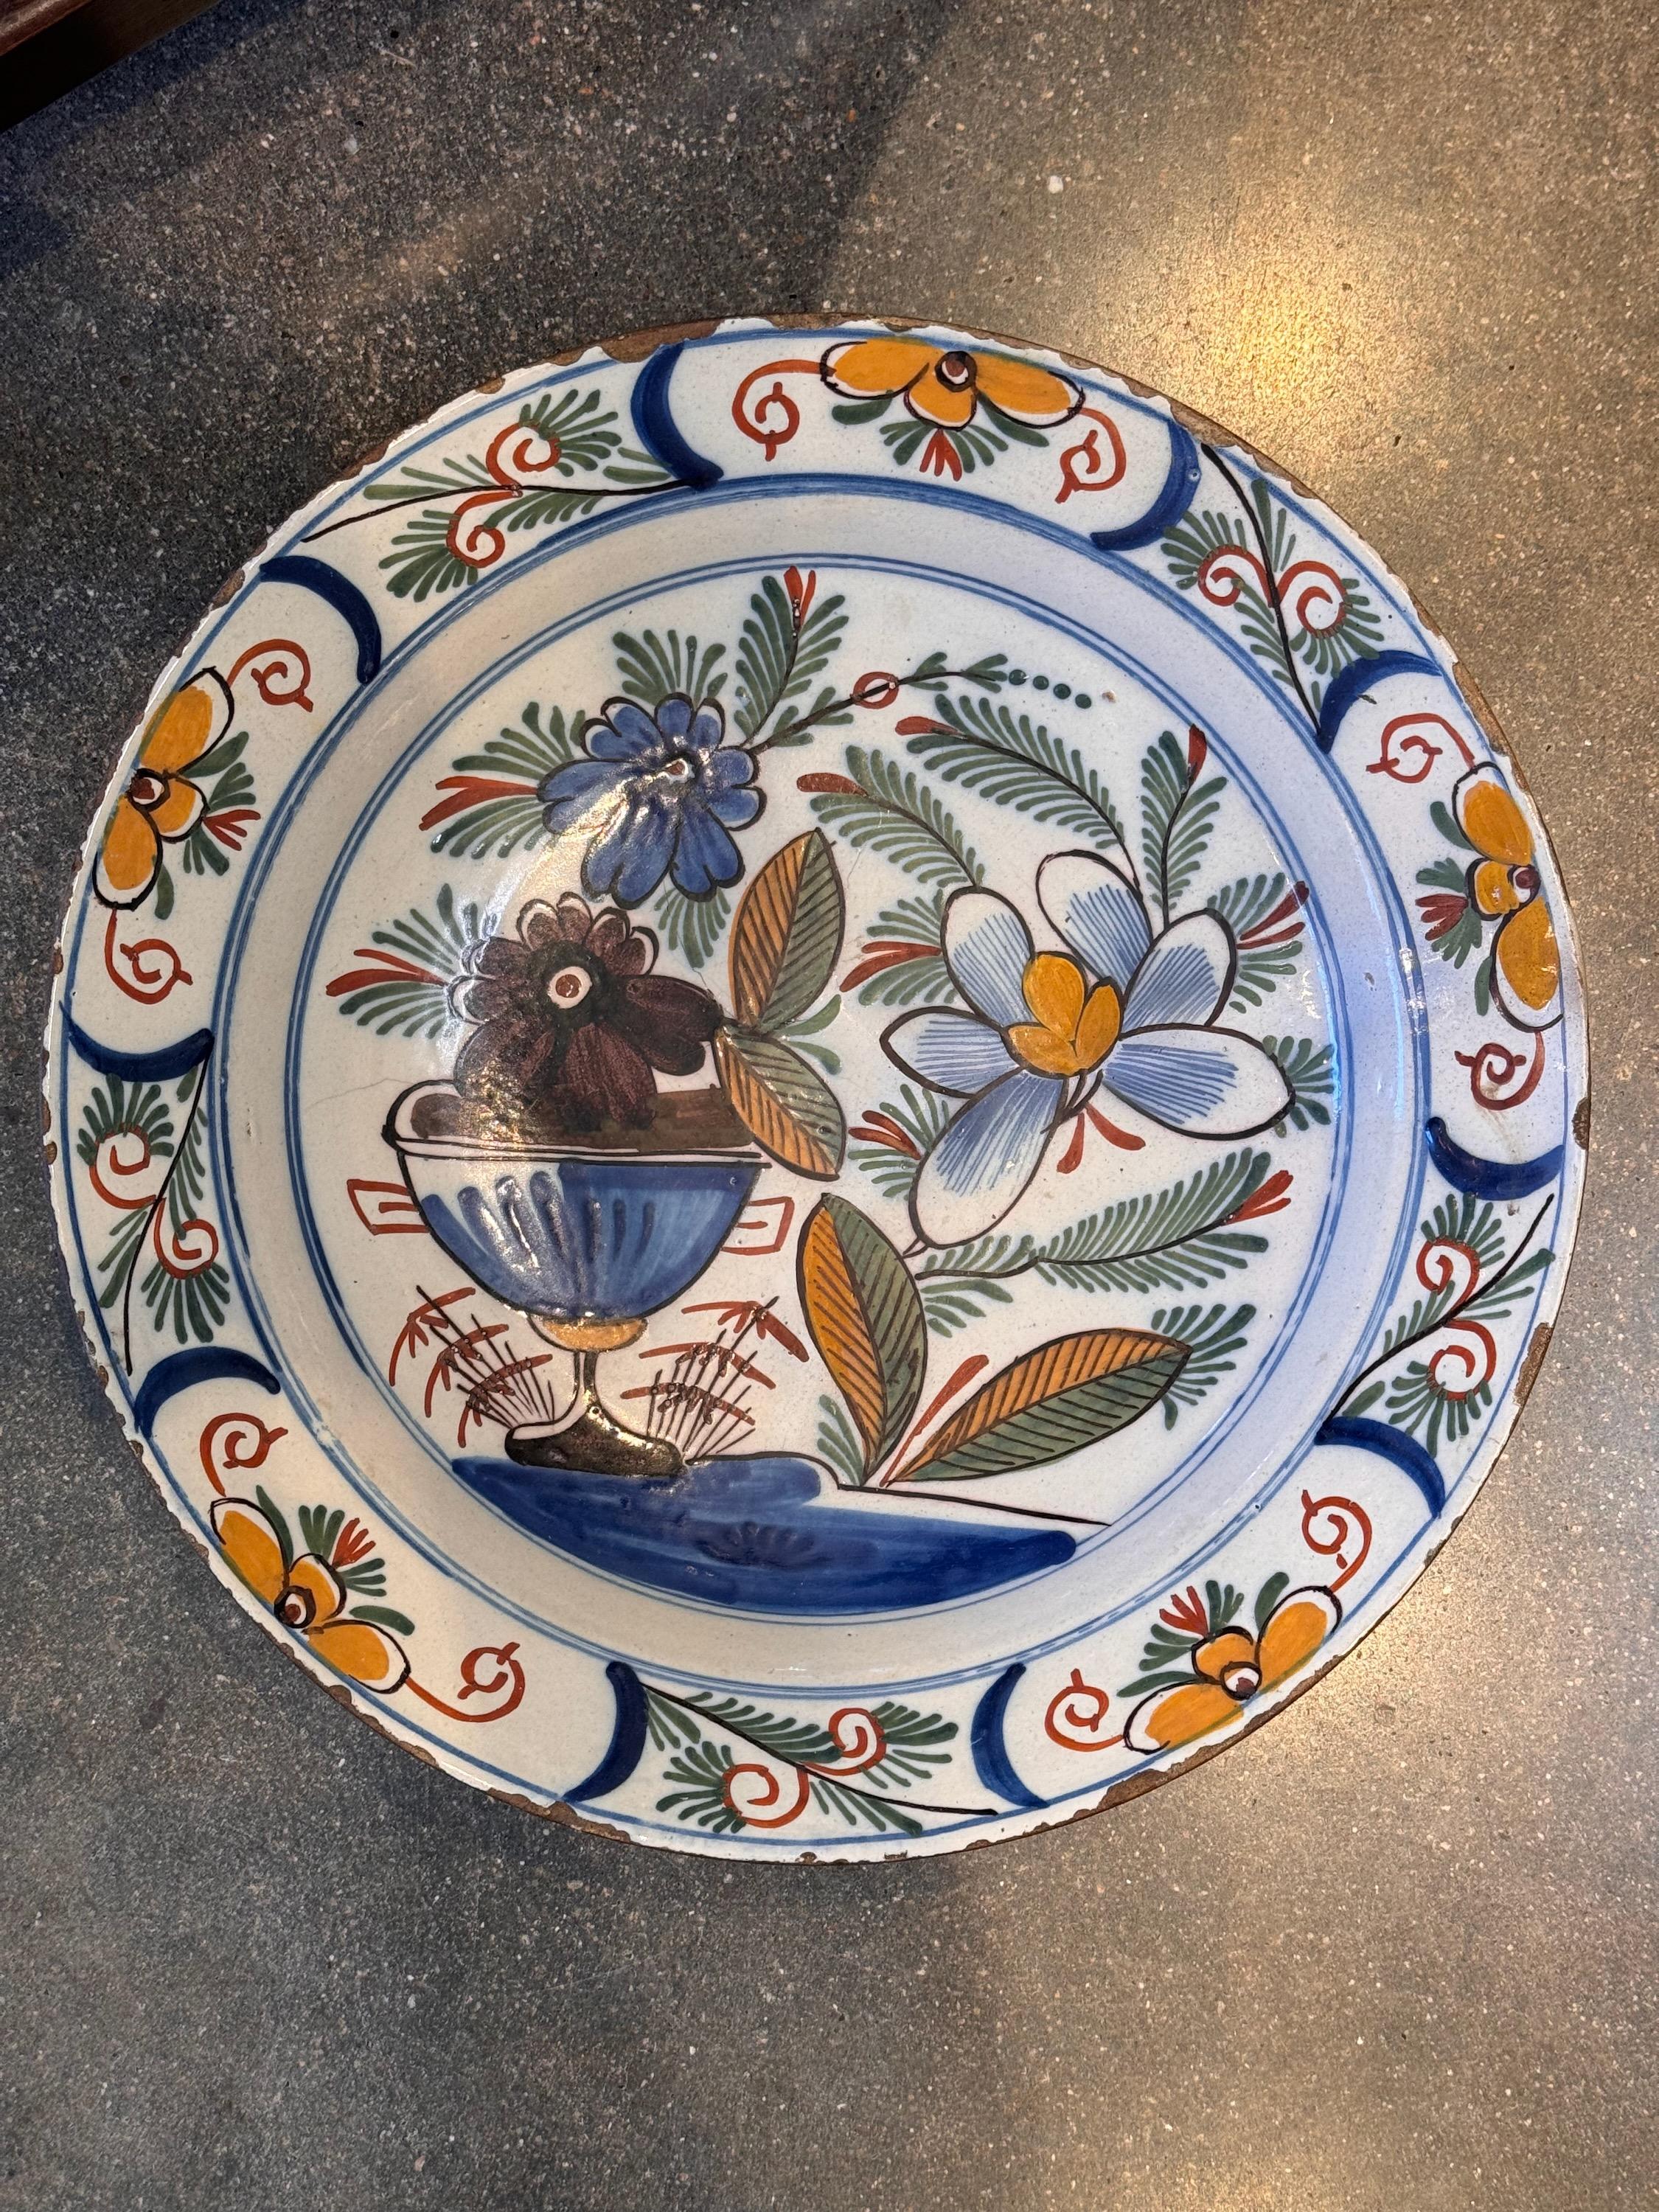 A great Polychrome Delft Charger. Nice decoration.